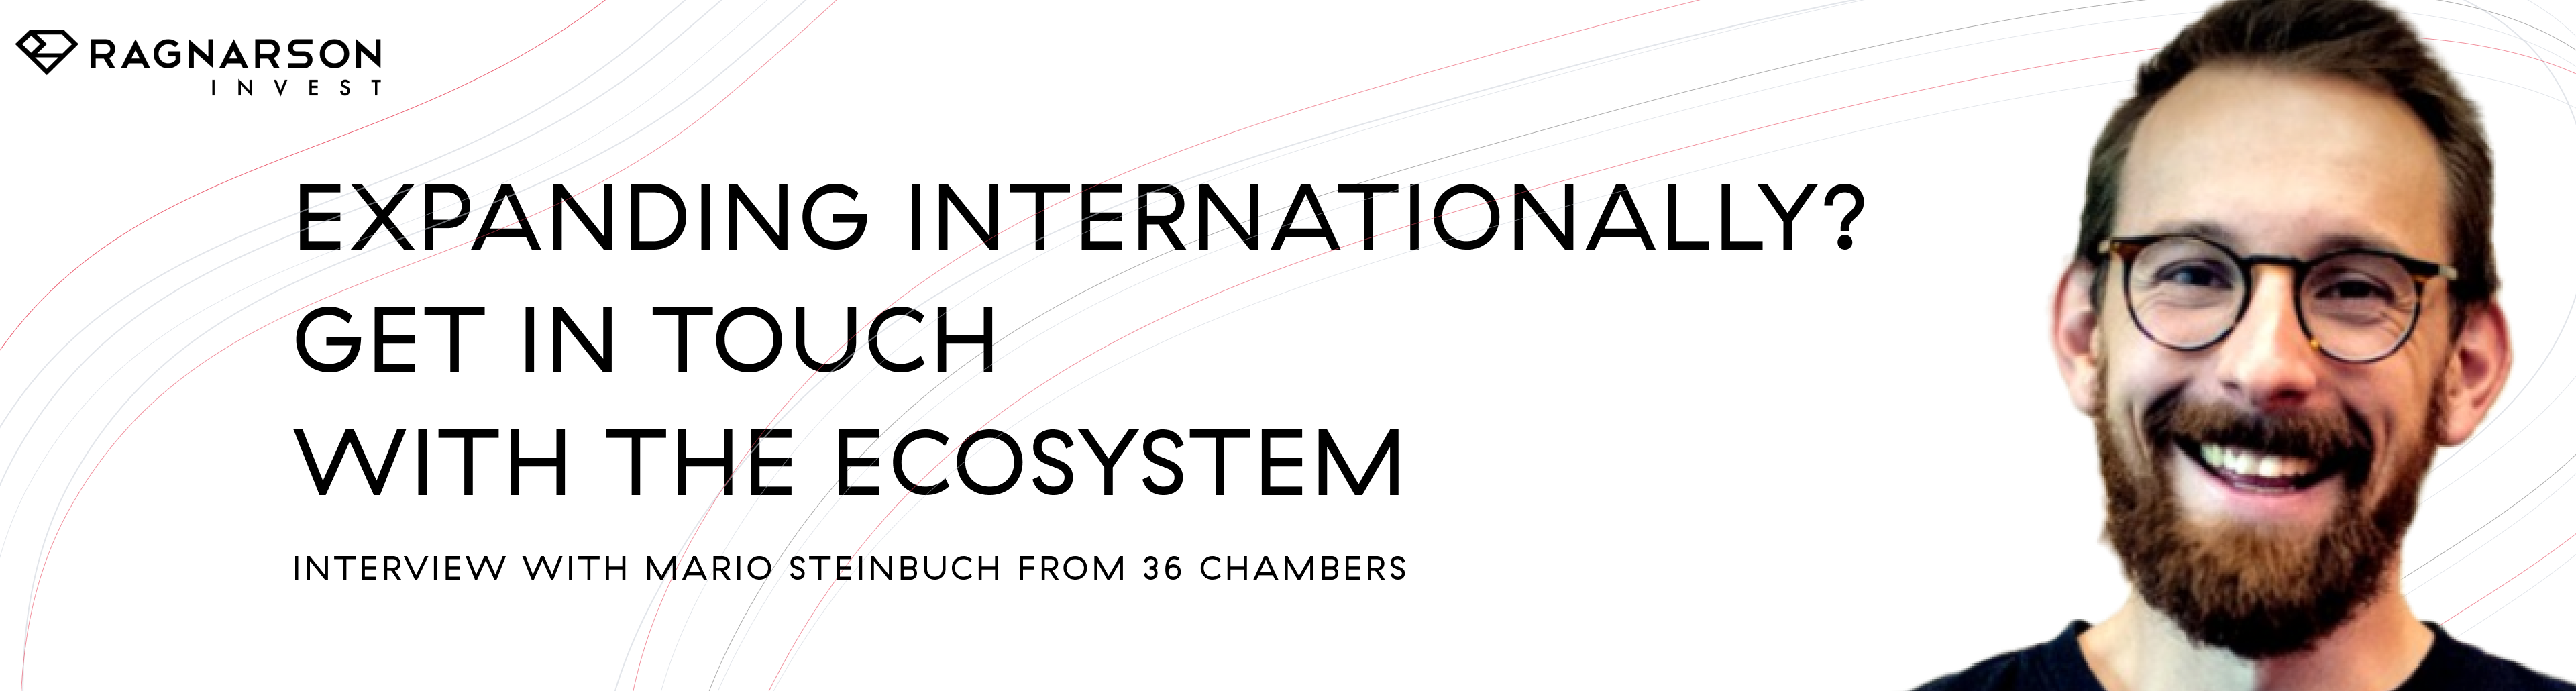 Expanding internationally? Get in touch with the ecosystem